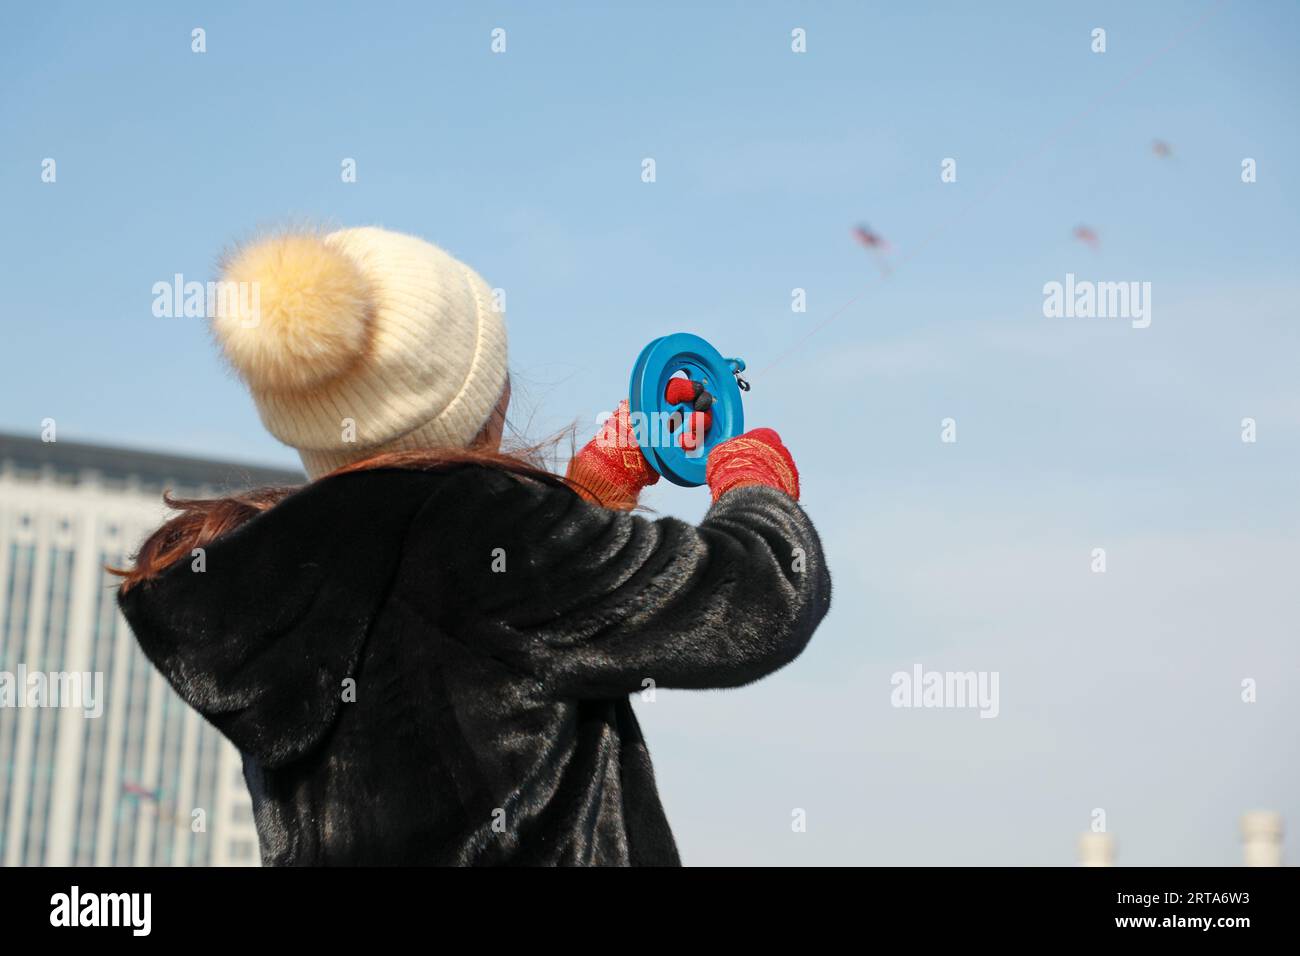 Luannan county - February 22, 2018: people fly kites in the square, luannan county, hebei province, China. Stock Photo